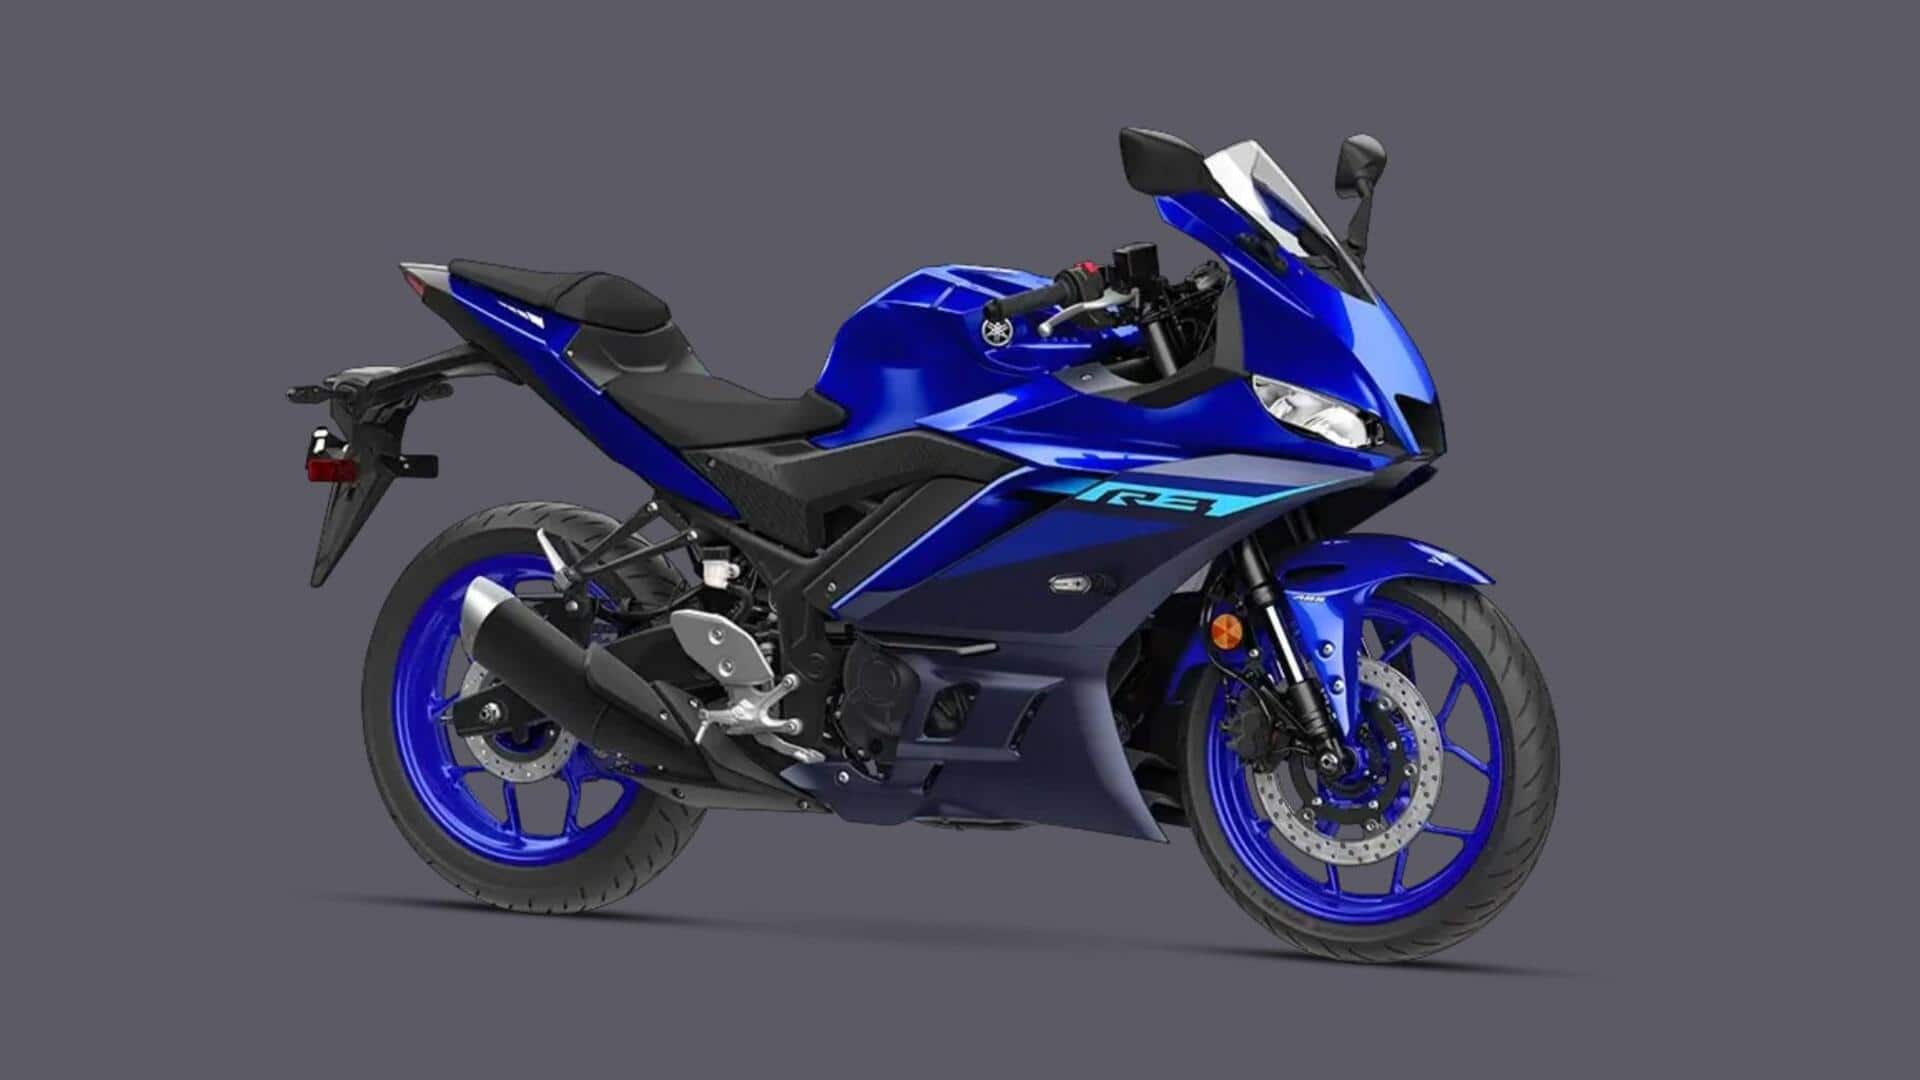 Top 5 reasons to buy Yamaha R3 supersport in India